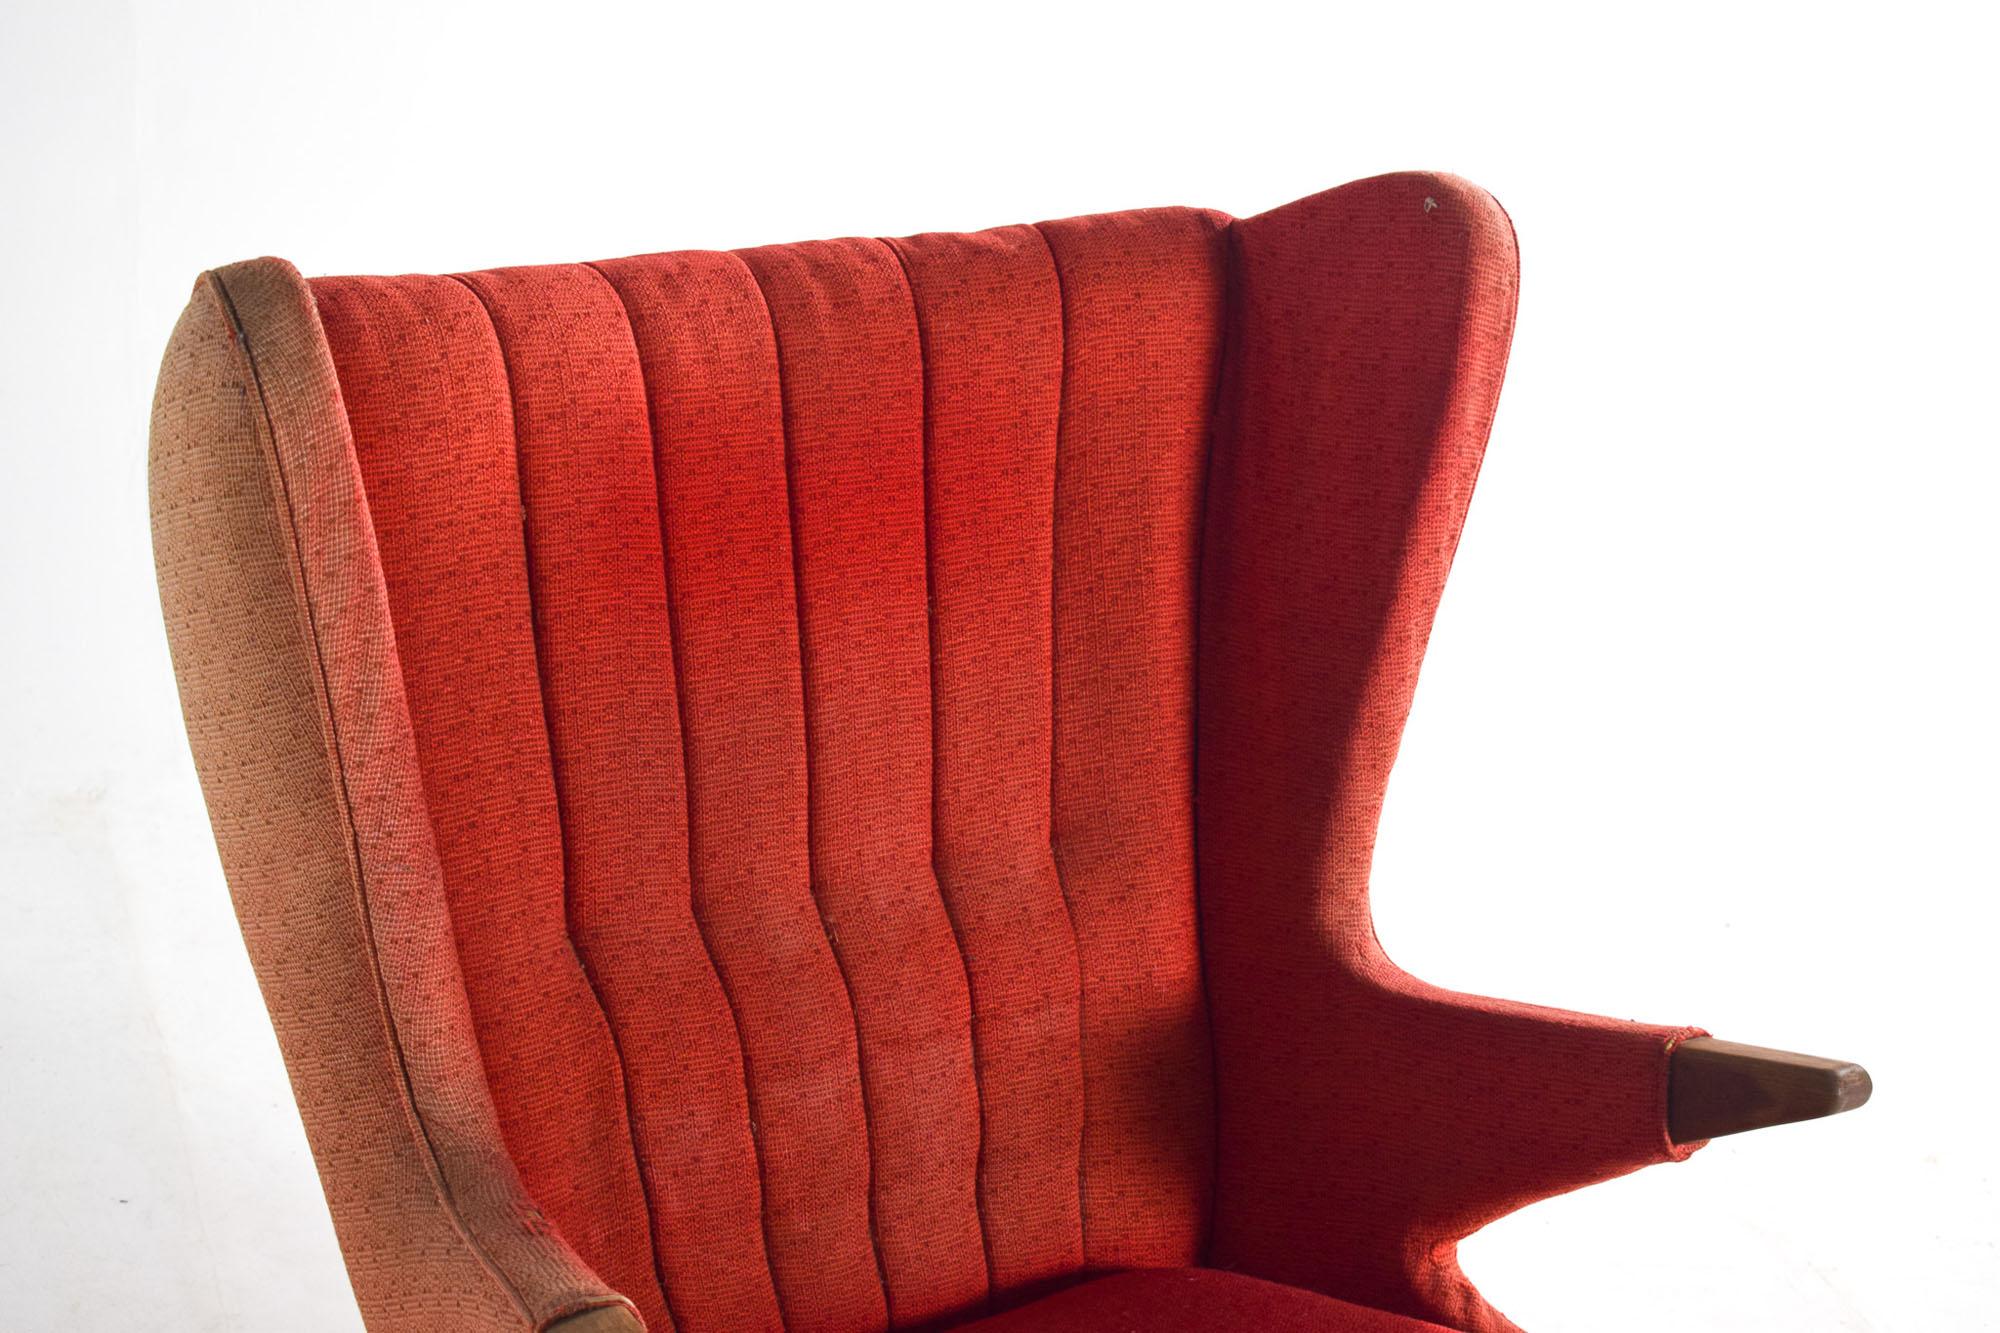 The wingchair, model 91 